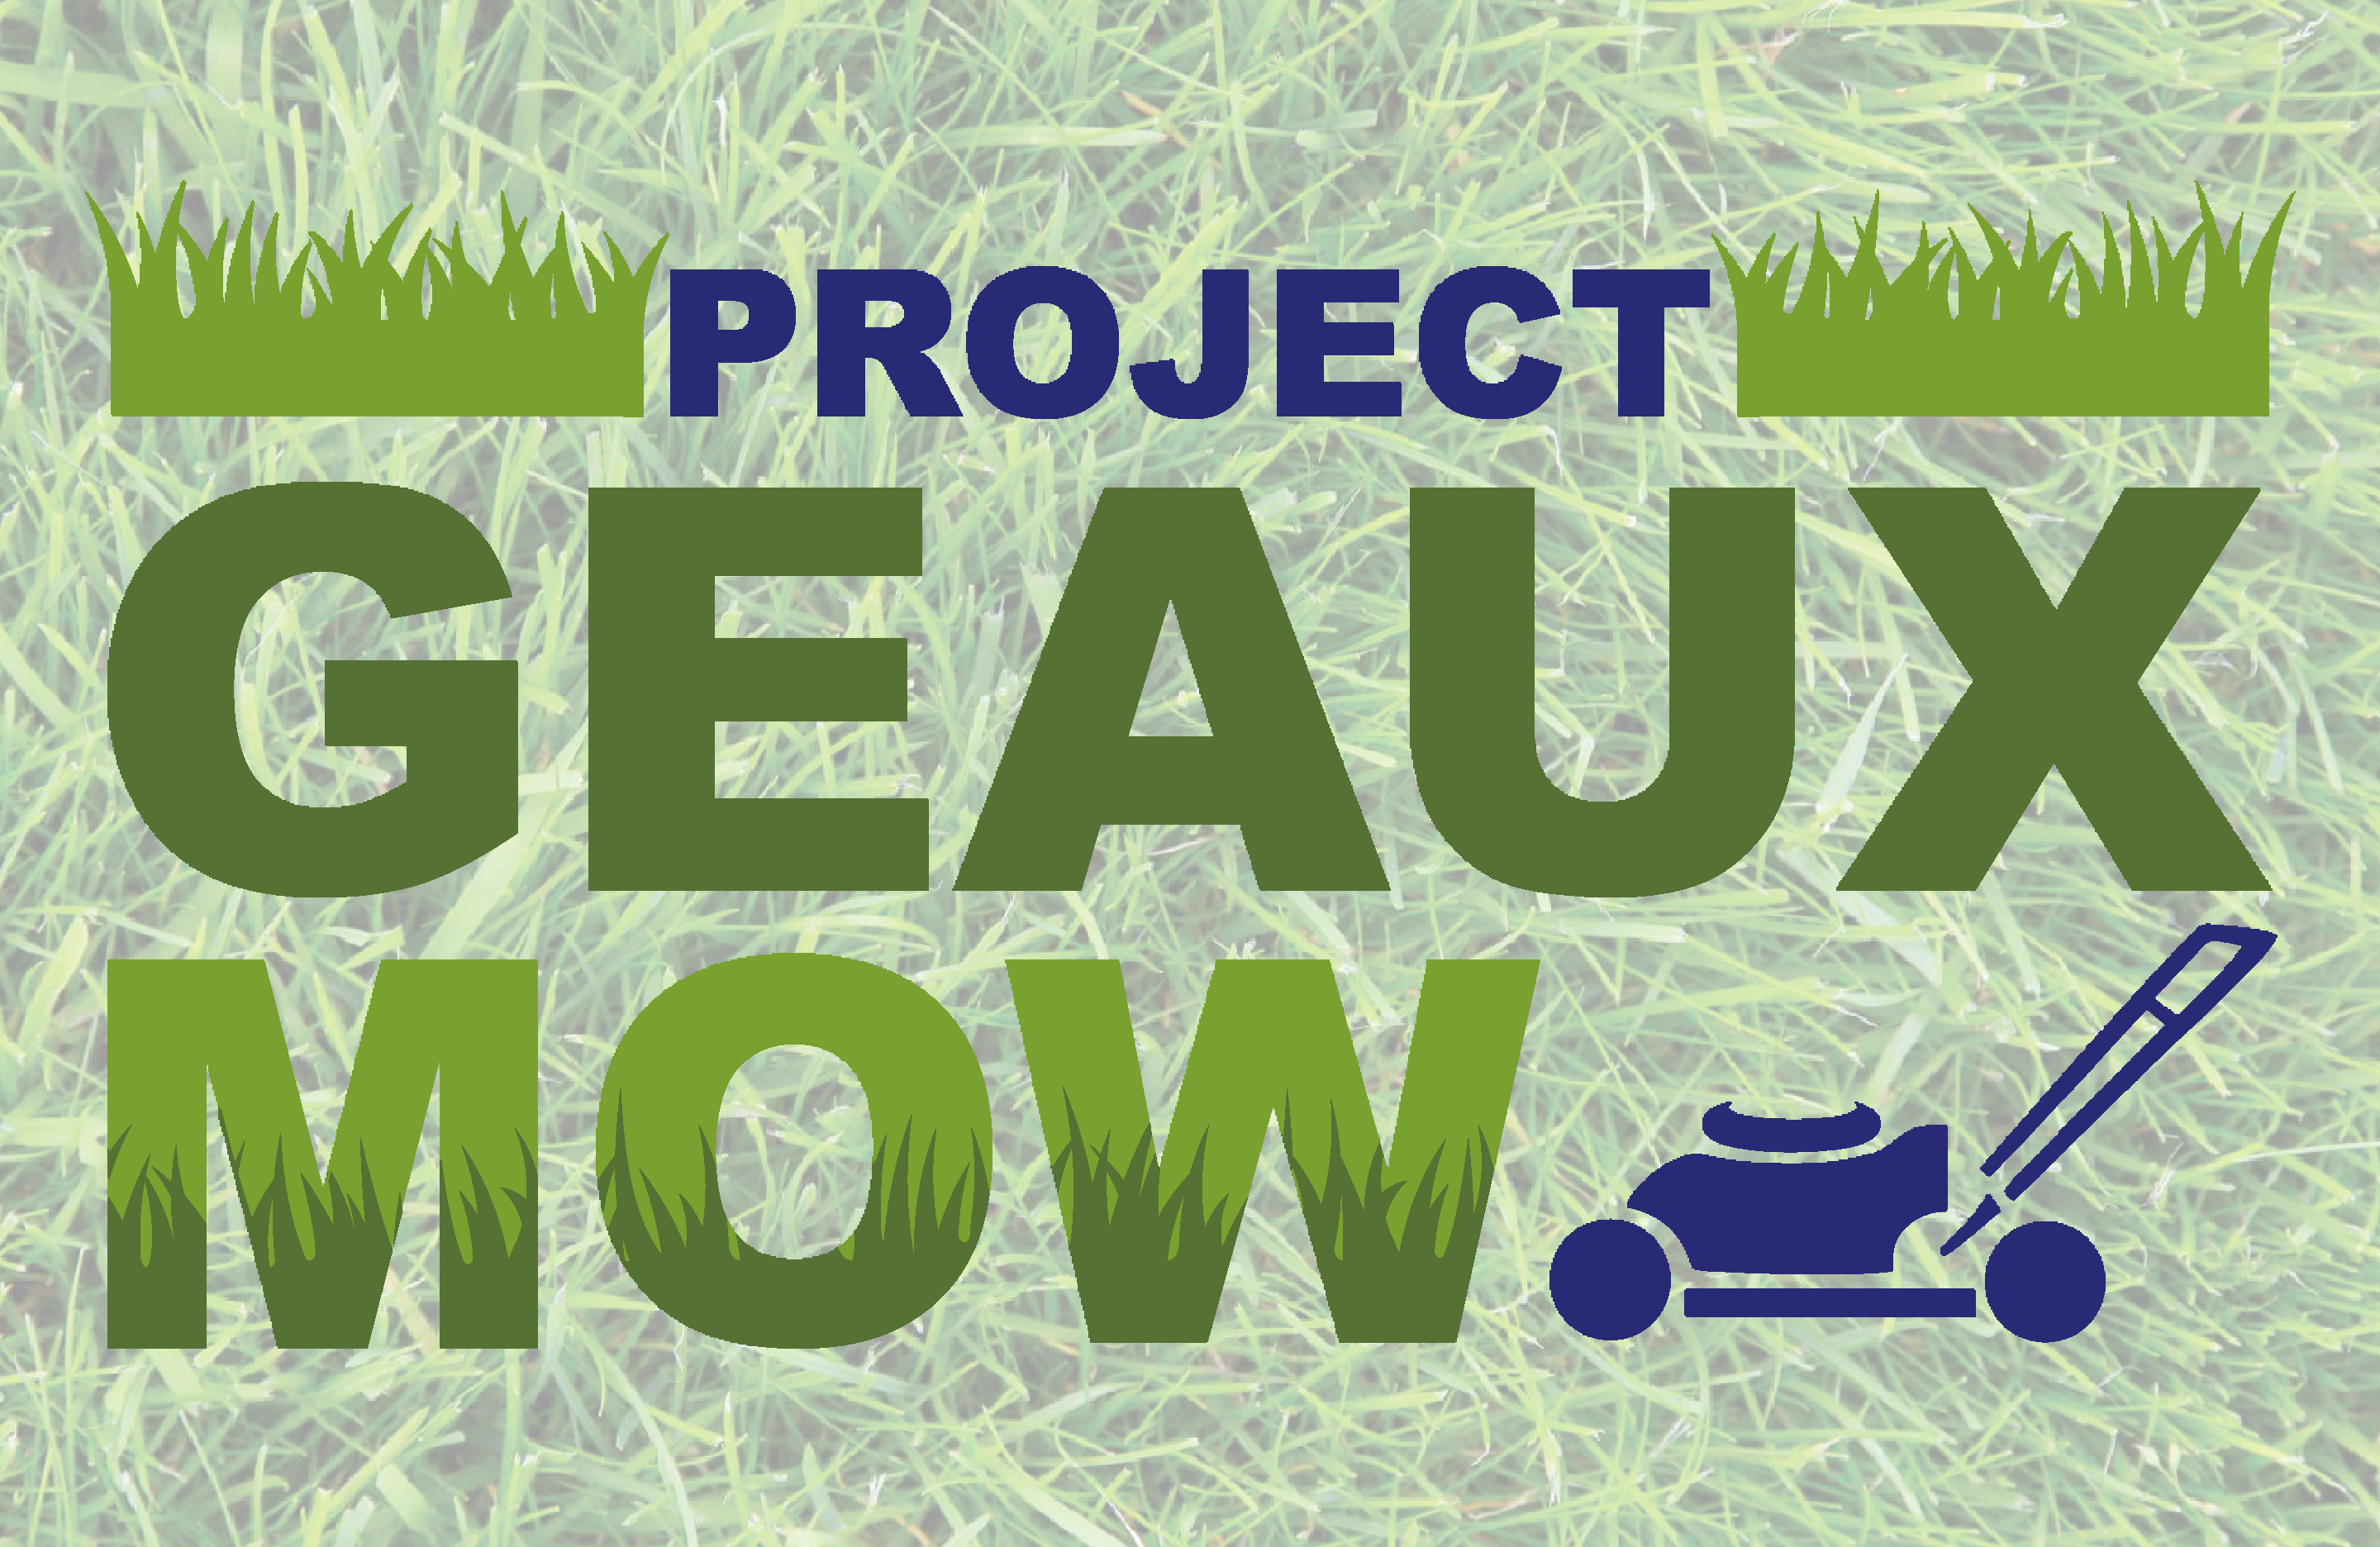 Project Geaux Mow